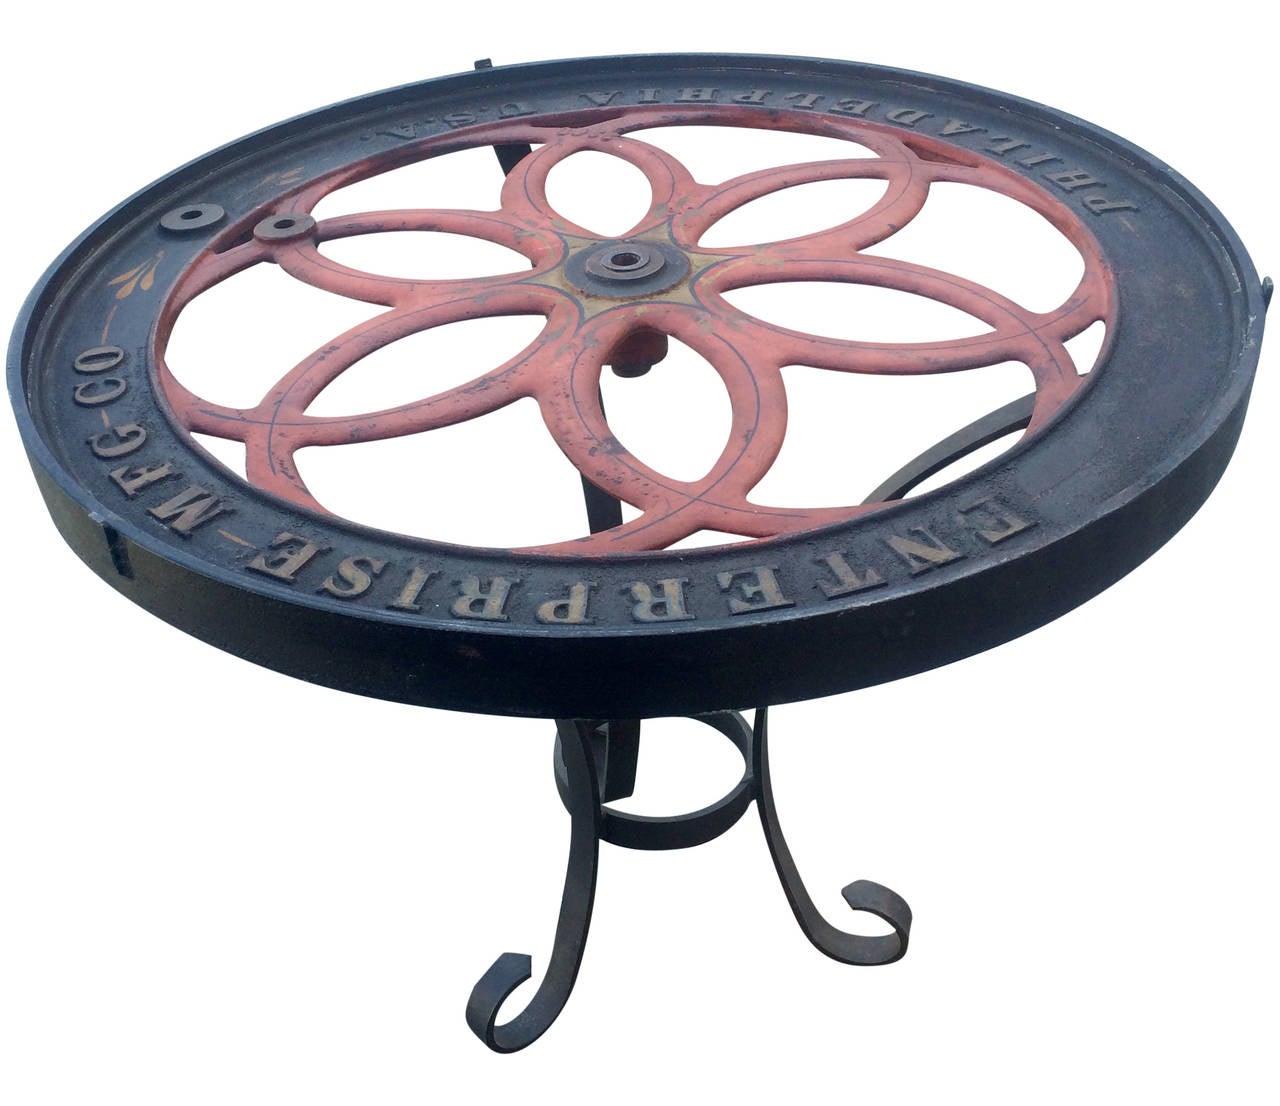 Wheel from a late 19th century coffee grinder outfitted into a great occasional table, this does have a glass top.